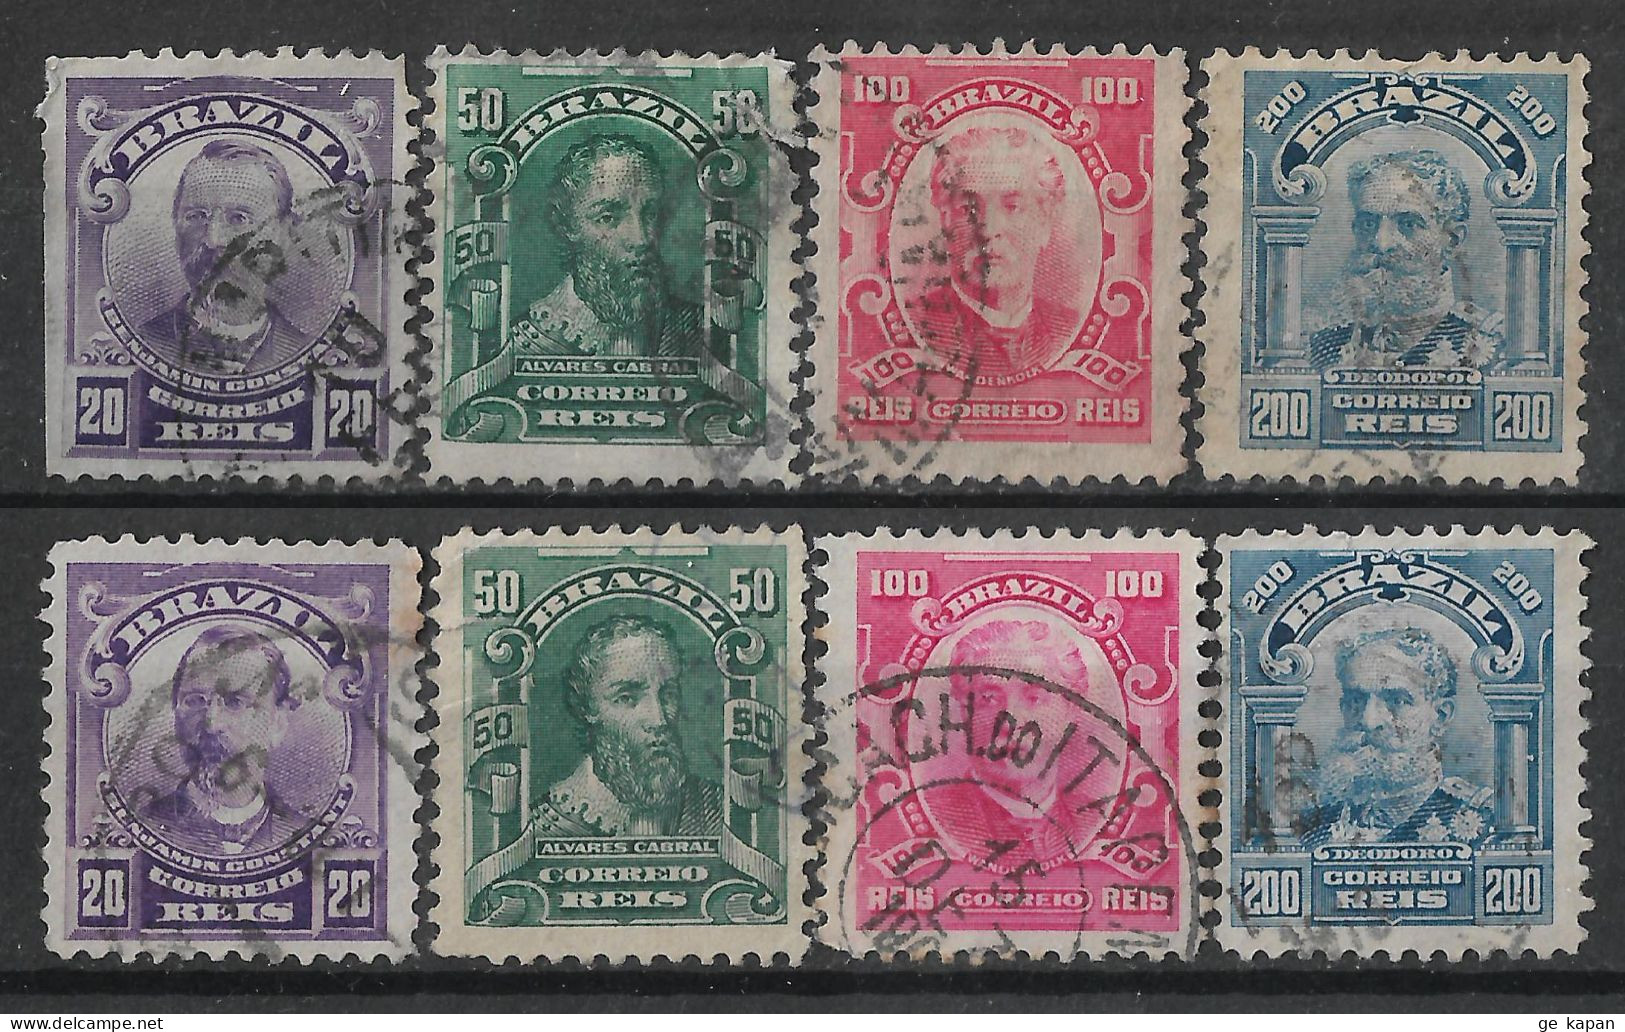 1906 BRAZIL SET OF 8 USED STAMPS (Scott # 175-177,179) - Used Stamps